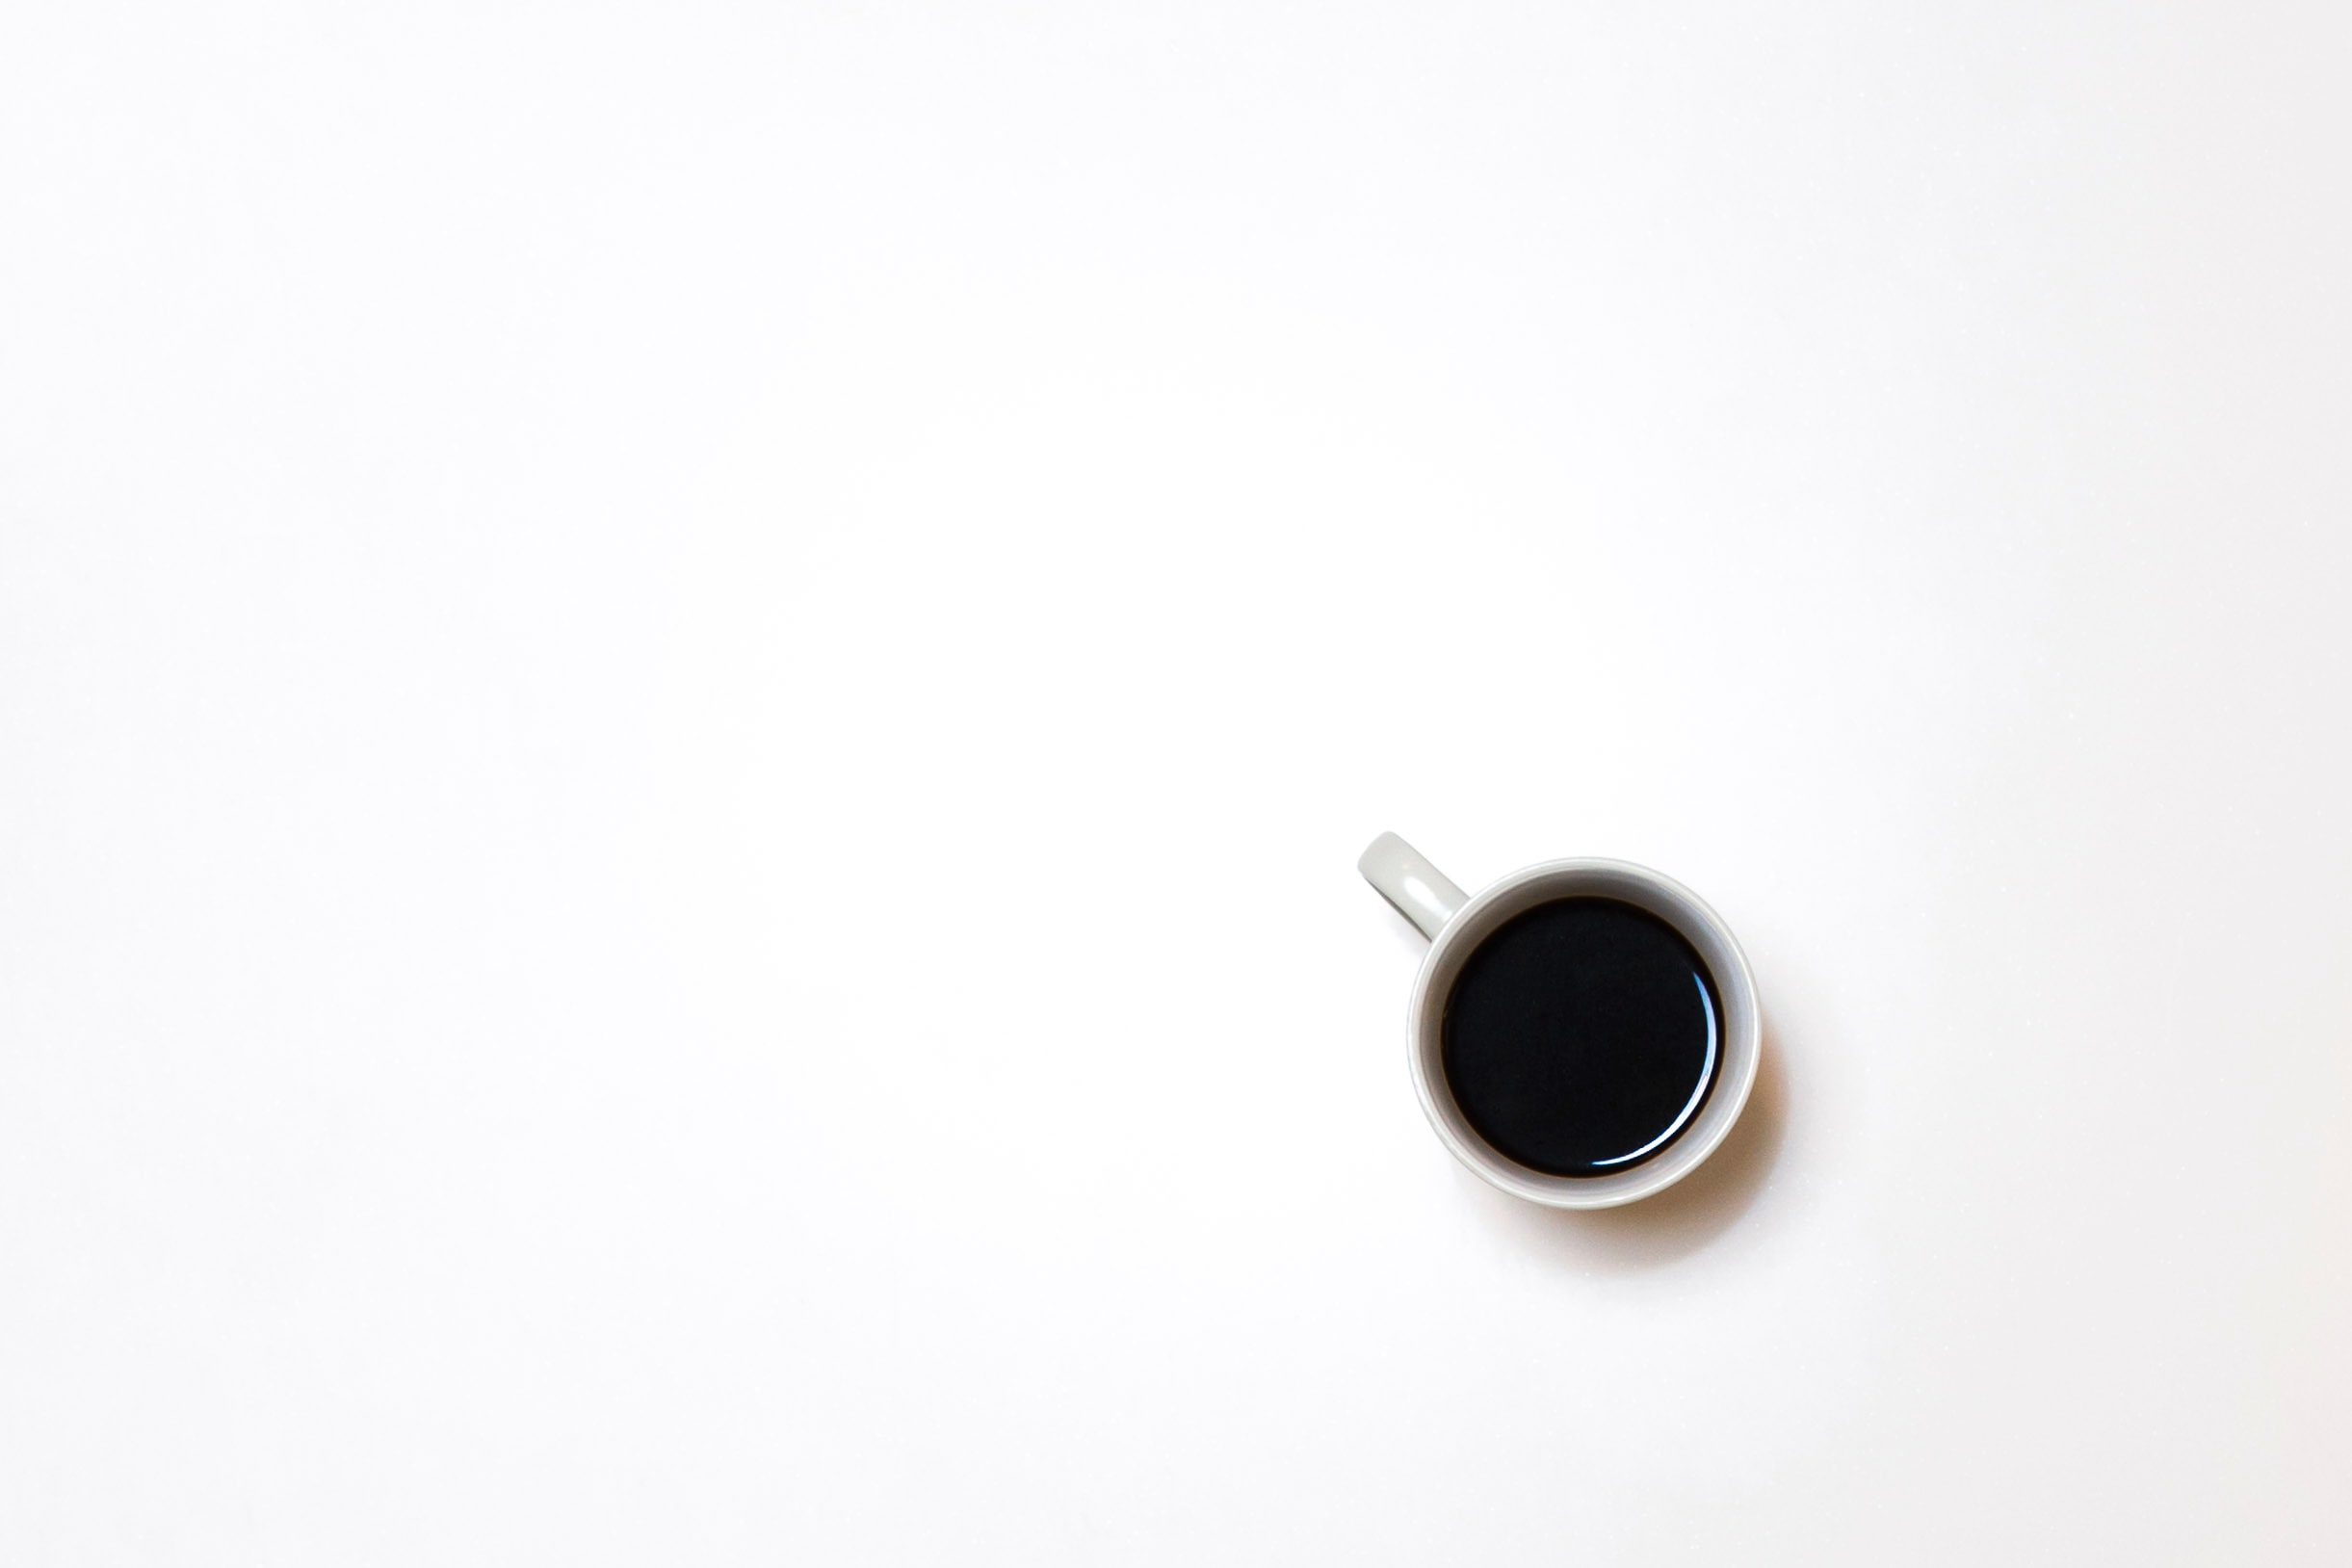 Example of negative space using a photograph of a cup of coffee on a blank canvas